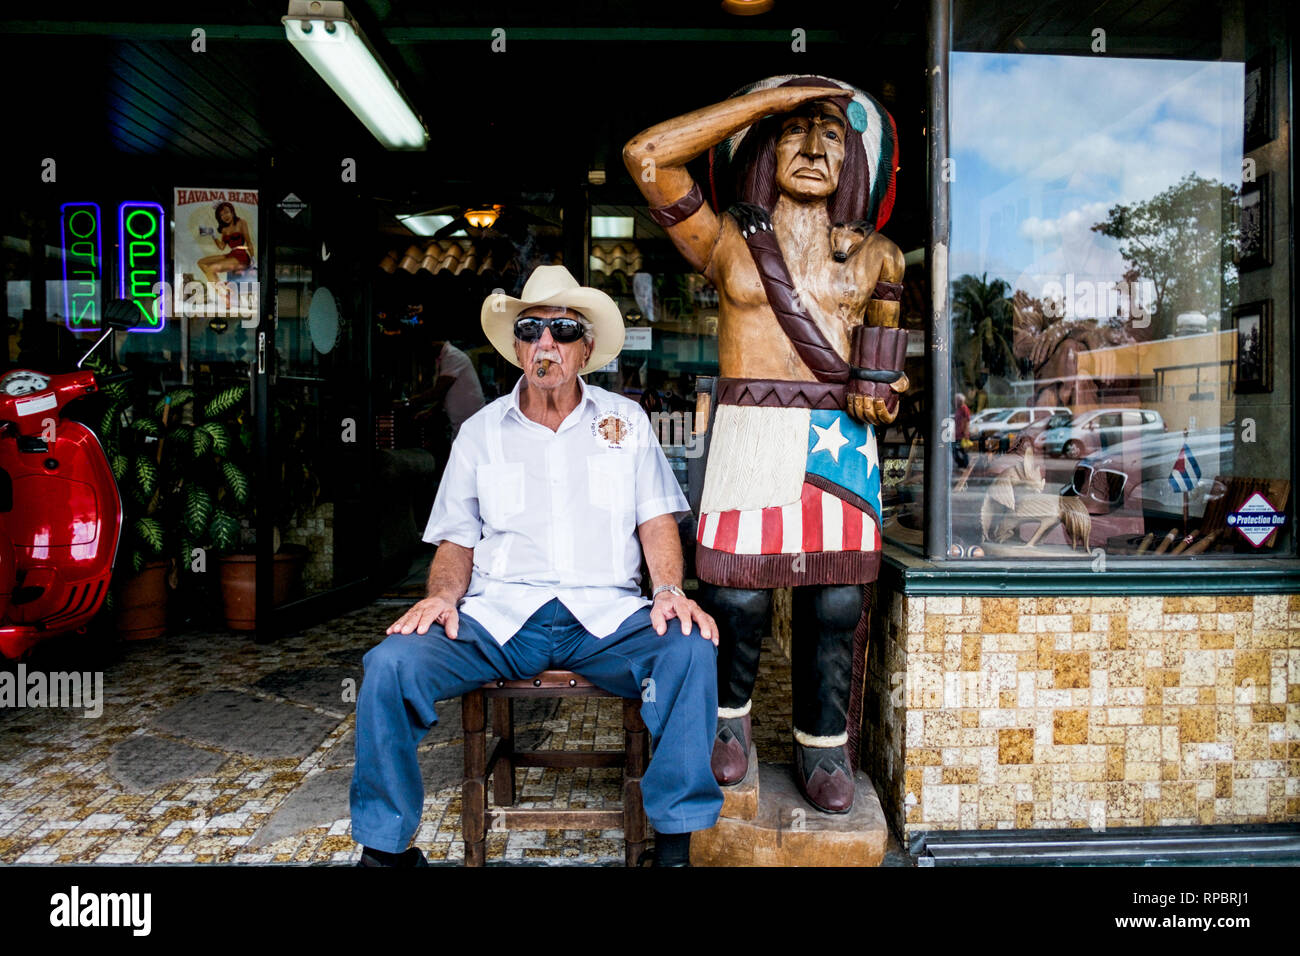 A cigar smoking man sitting at the entrance of a cigar shop in the Little Havana neighborhood, Miami. (Photo credit: Gonzales Photo - Flemming Bo Jensen). Stock Photo